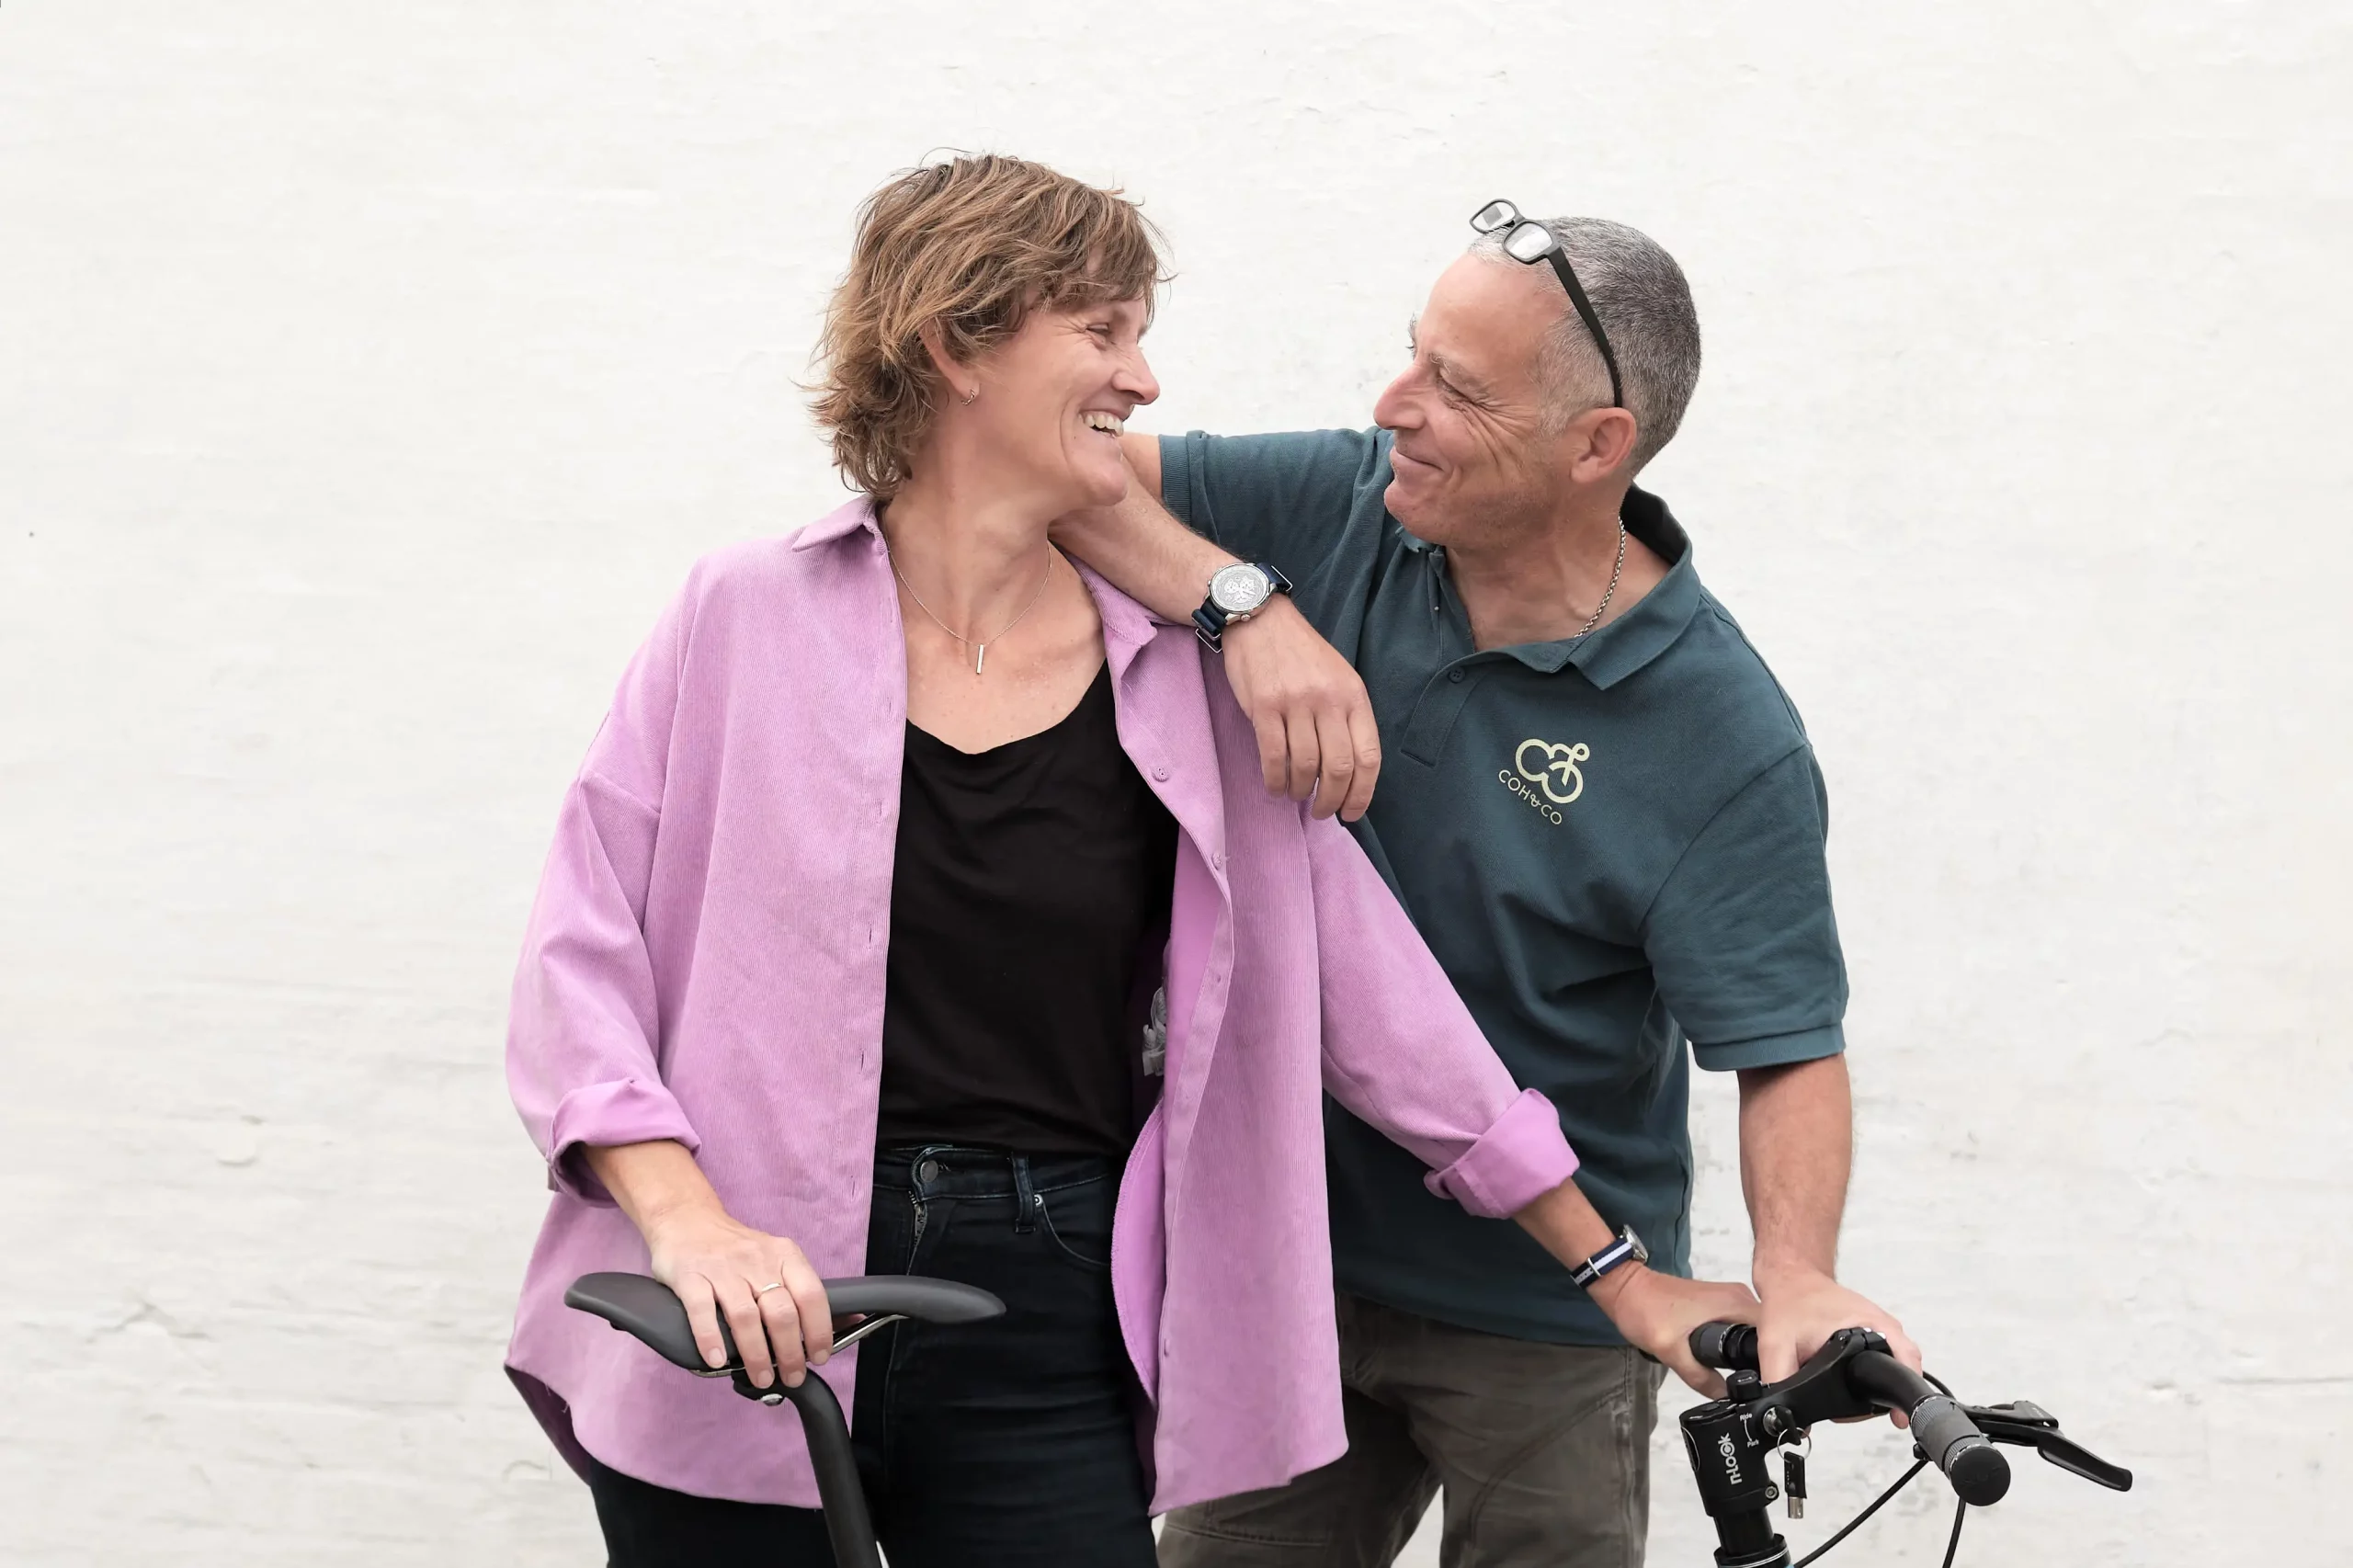 Coh&Co founders, Mette and Paul, laugh while looking at each other at the bikefarm in Kelstrup, Slagelse